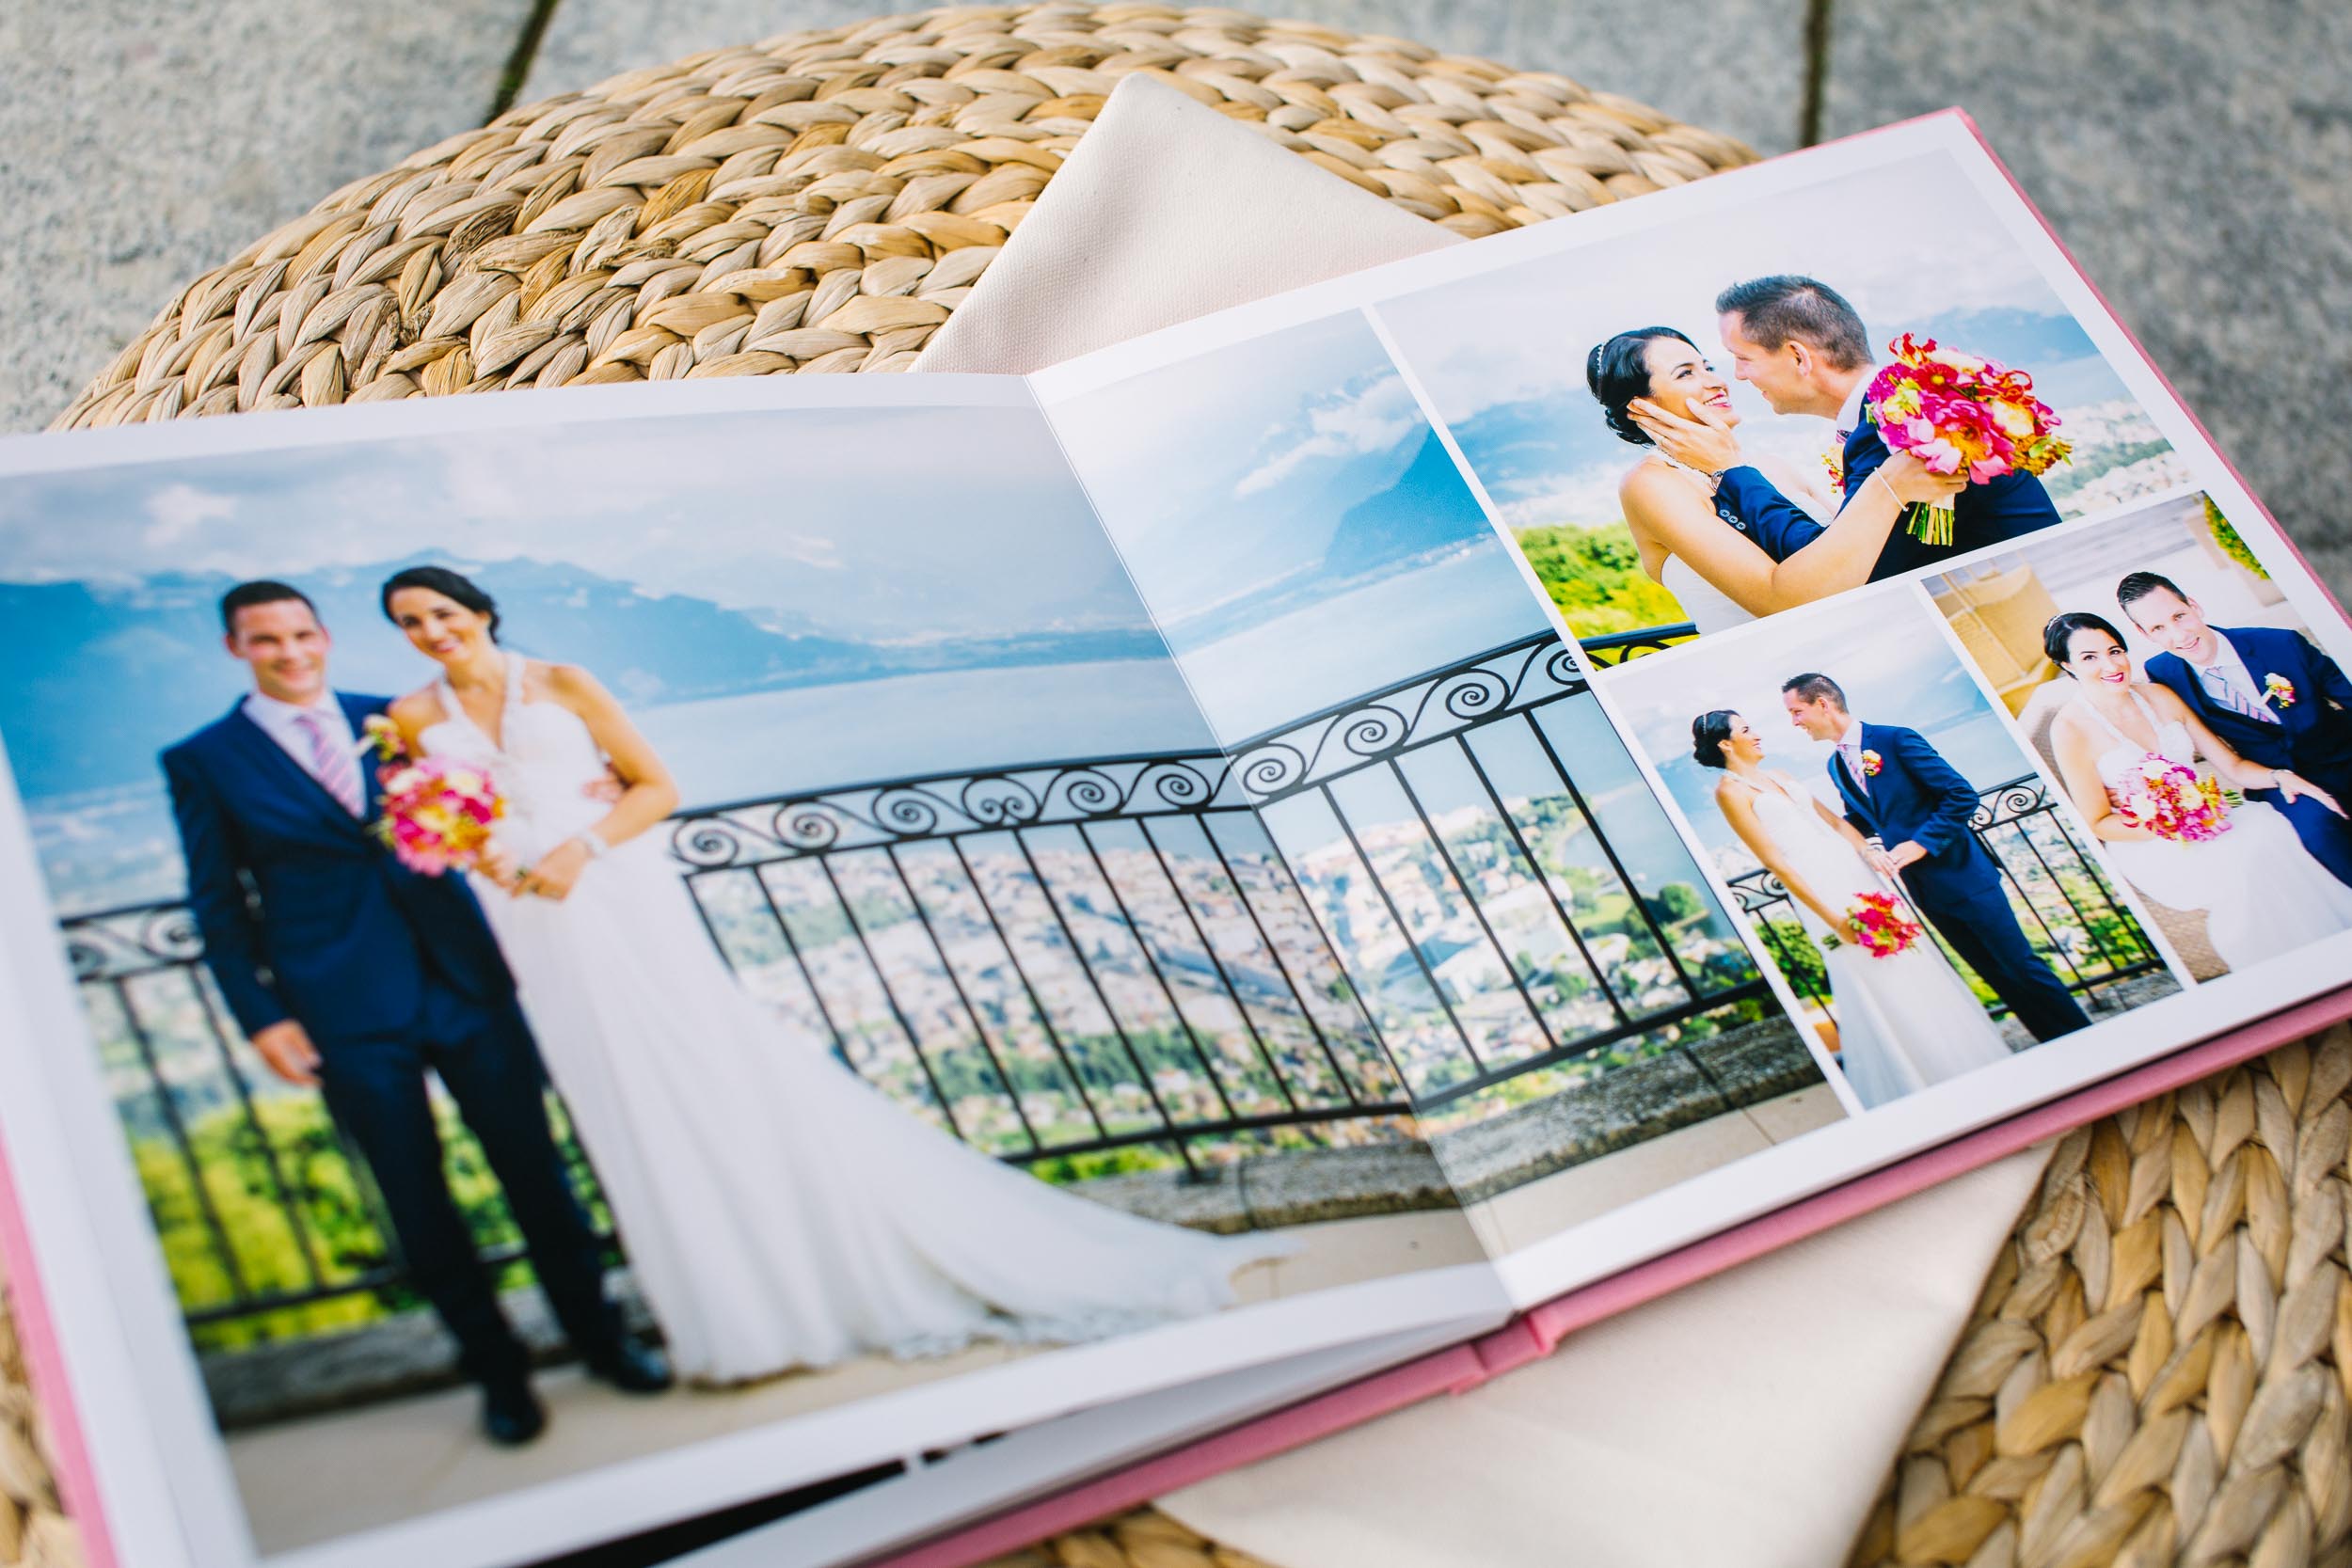 Choosing a photo album | Top tips for picking the right size and style of album